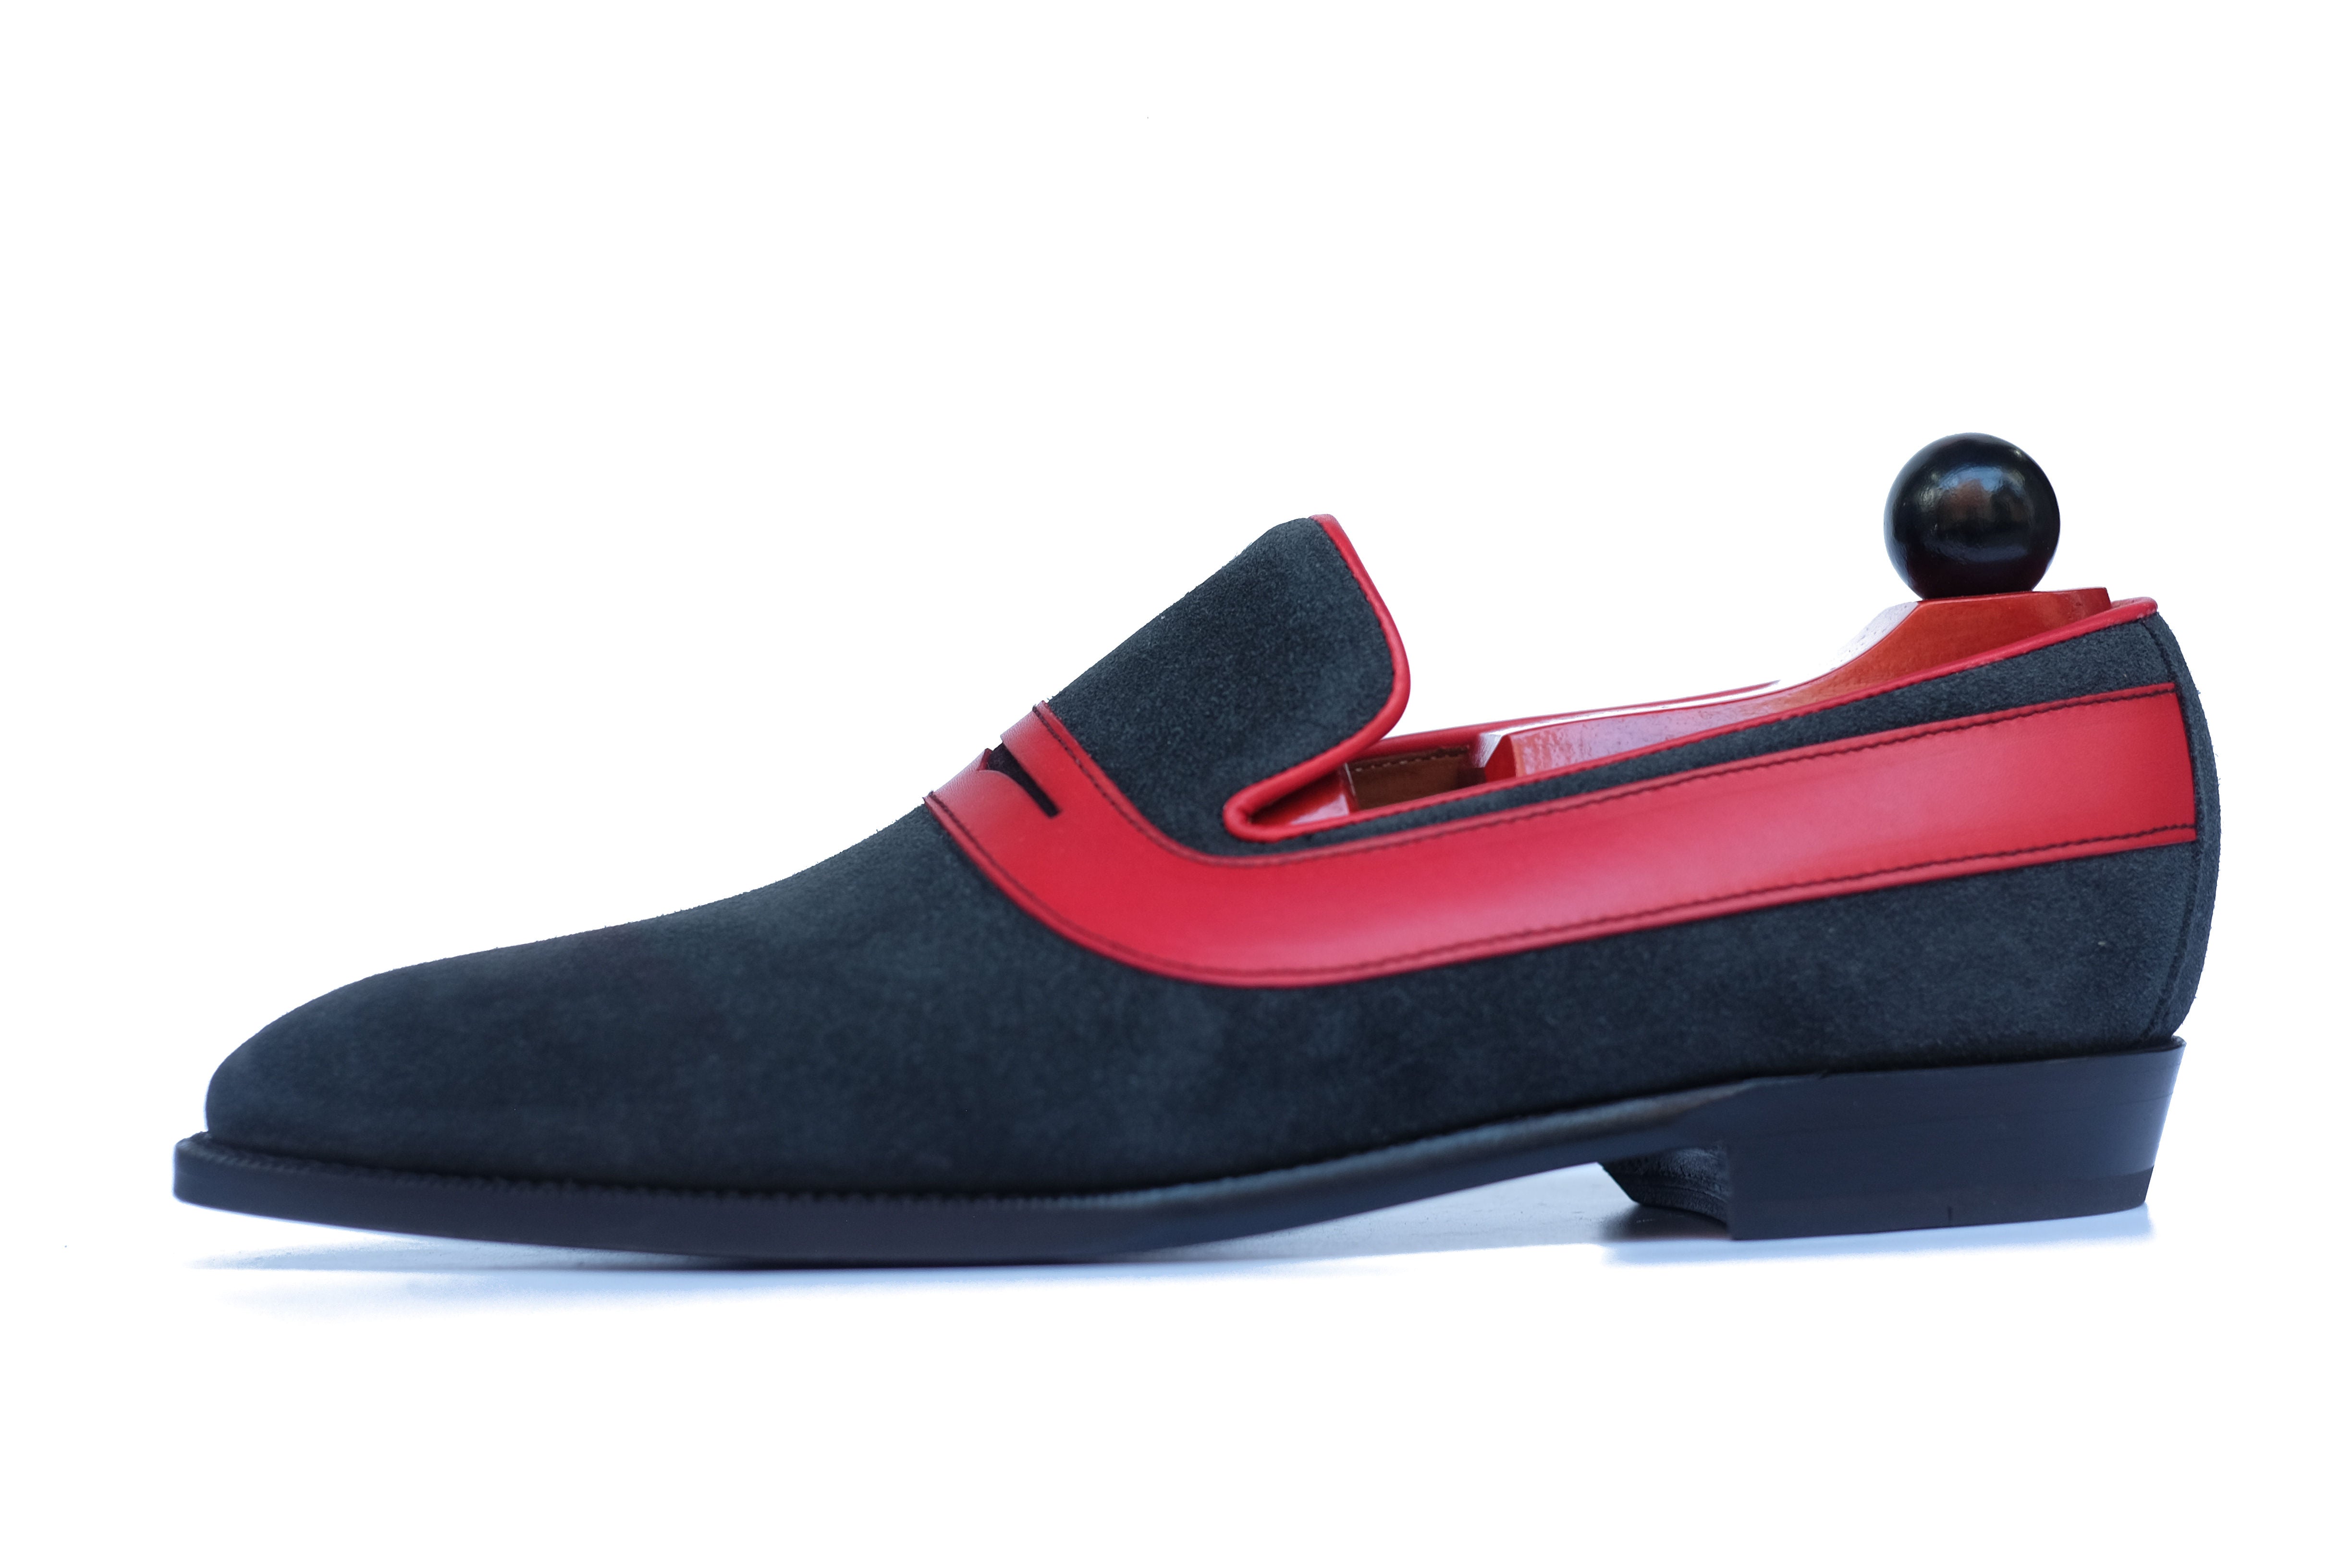 Marcos - MTO - Charcoal Suede / Red Calf - LPB Last - Single Leather Sole